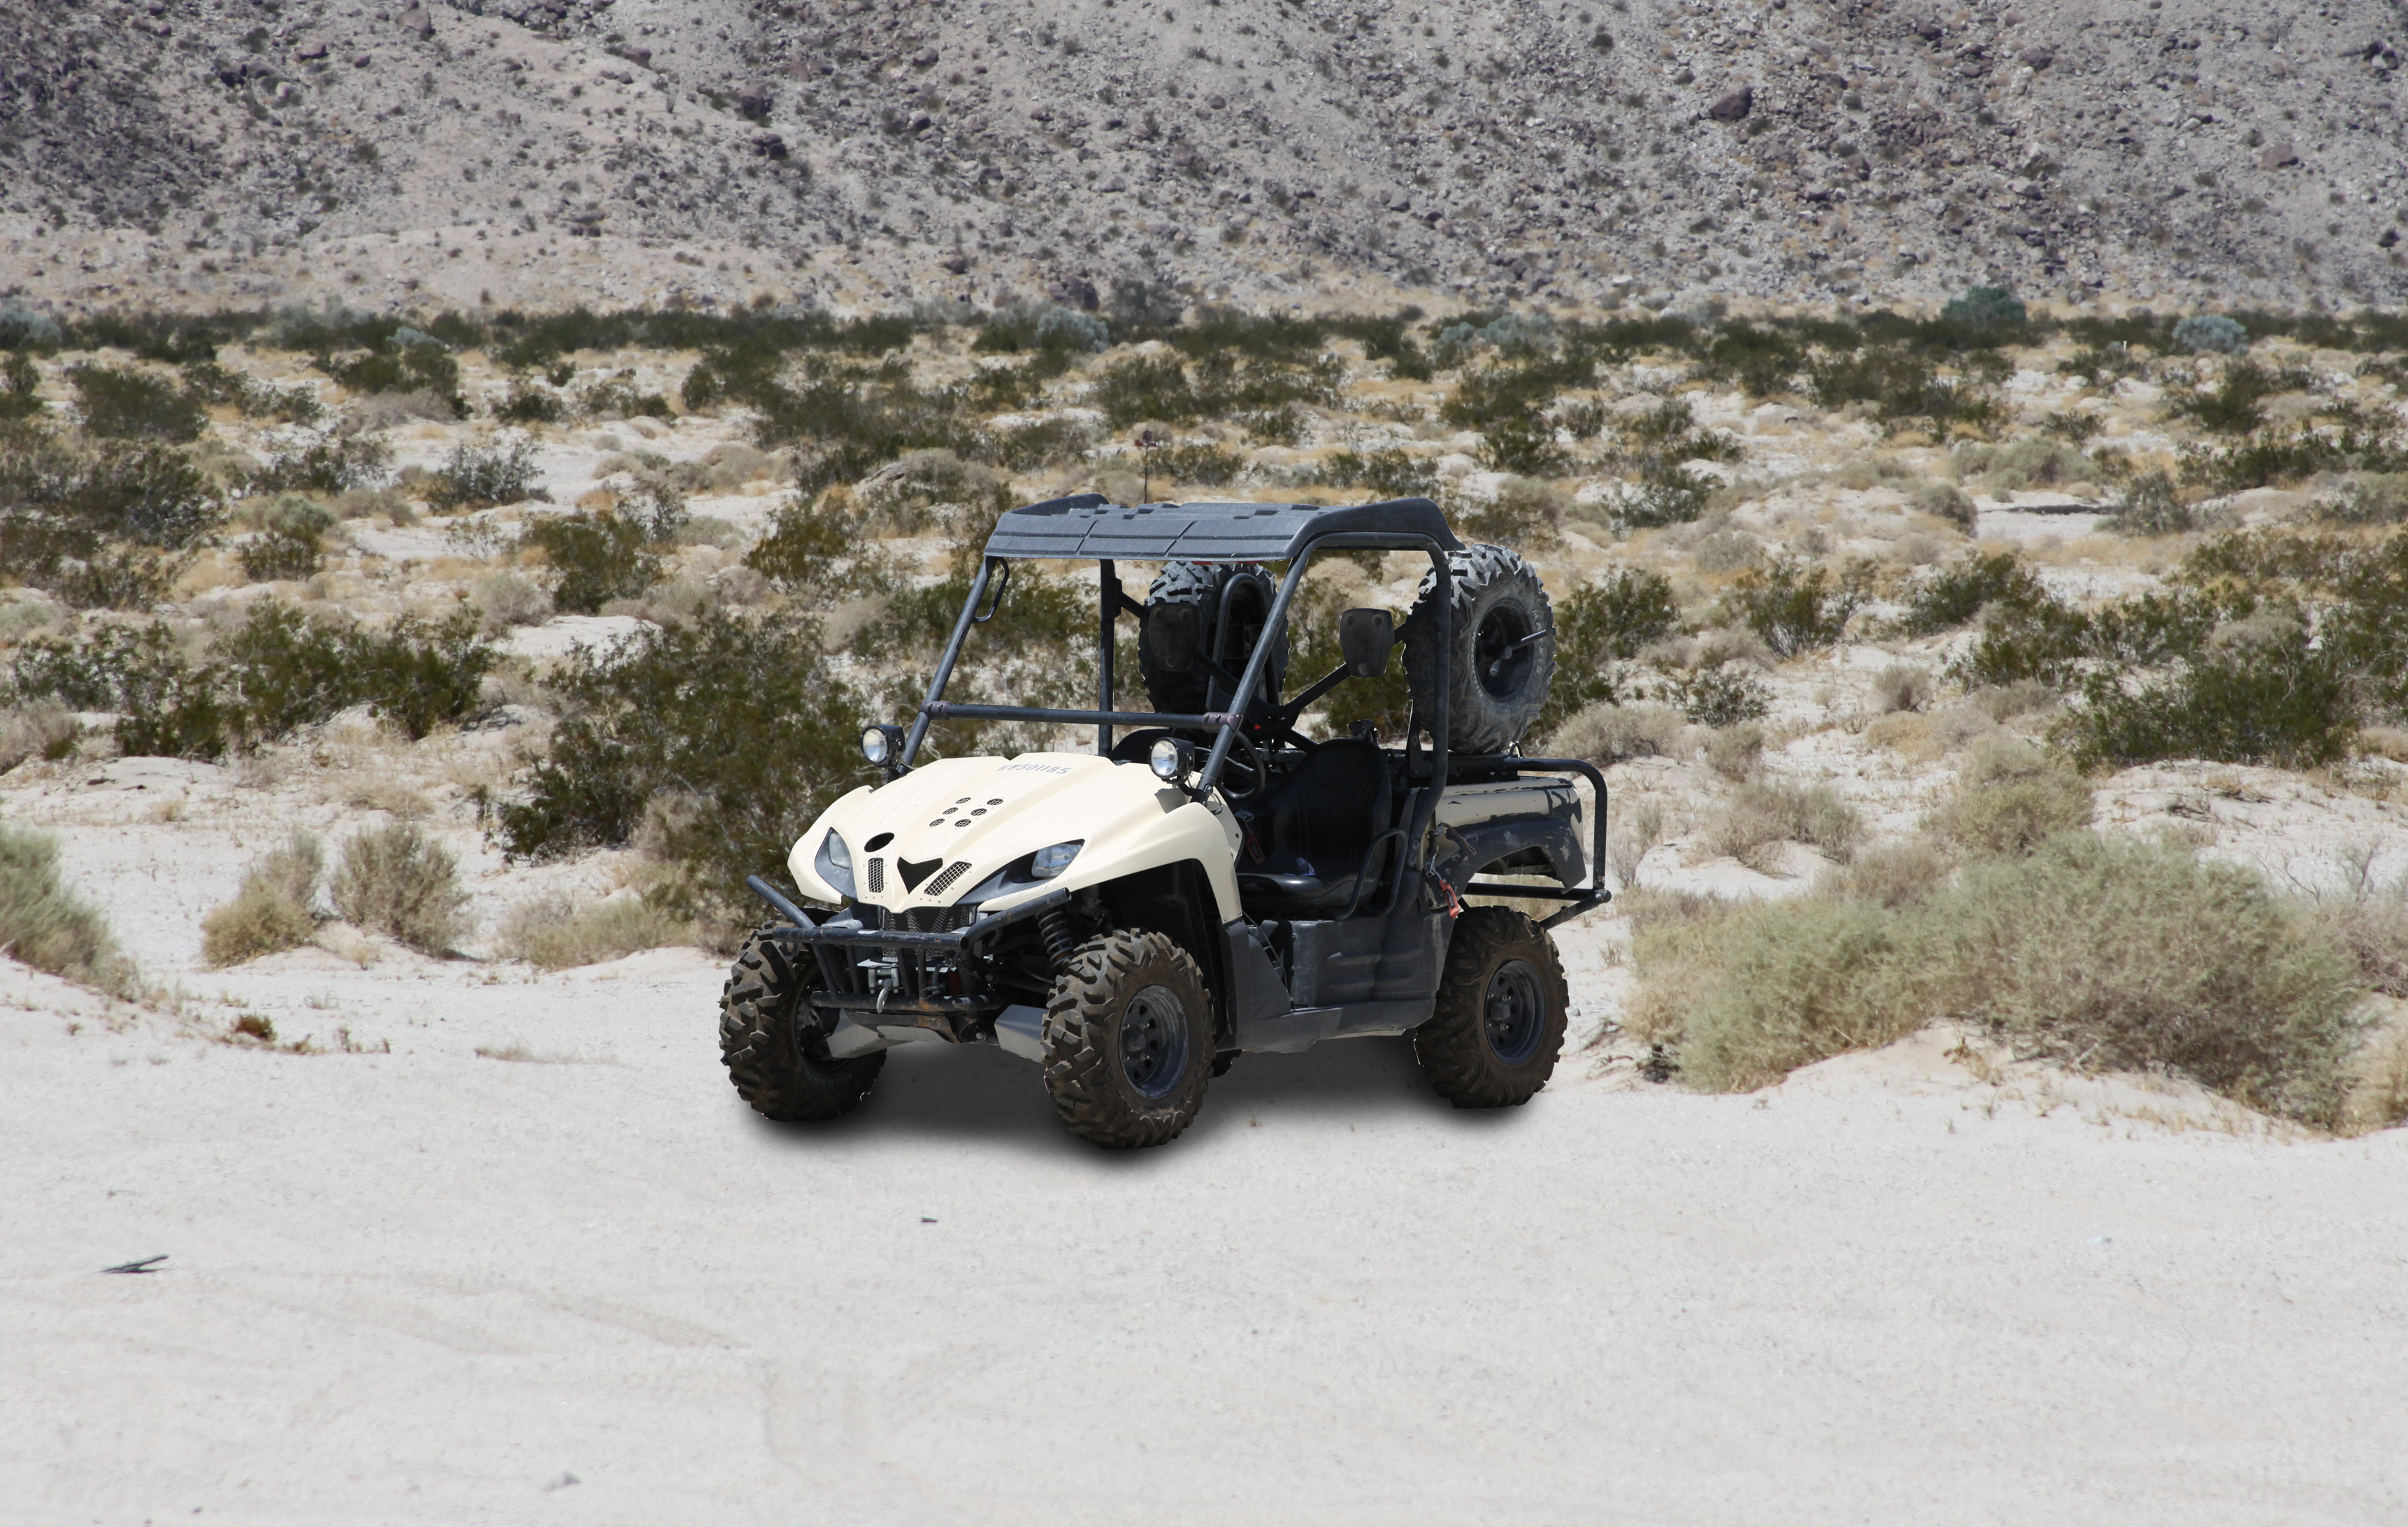 The Lightweight Tactical All-Terrain Vehicle used by SEALs. (Predator, Inc.)